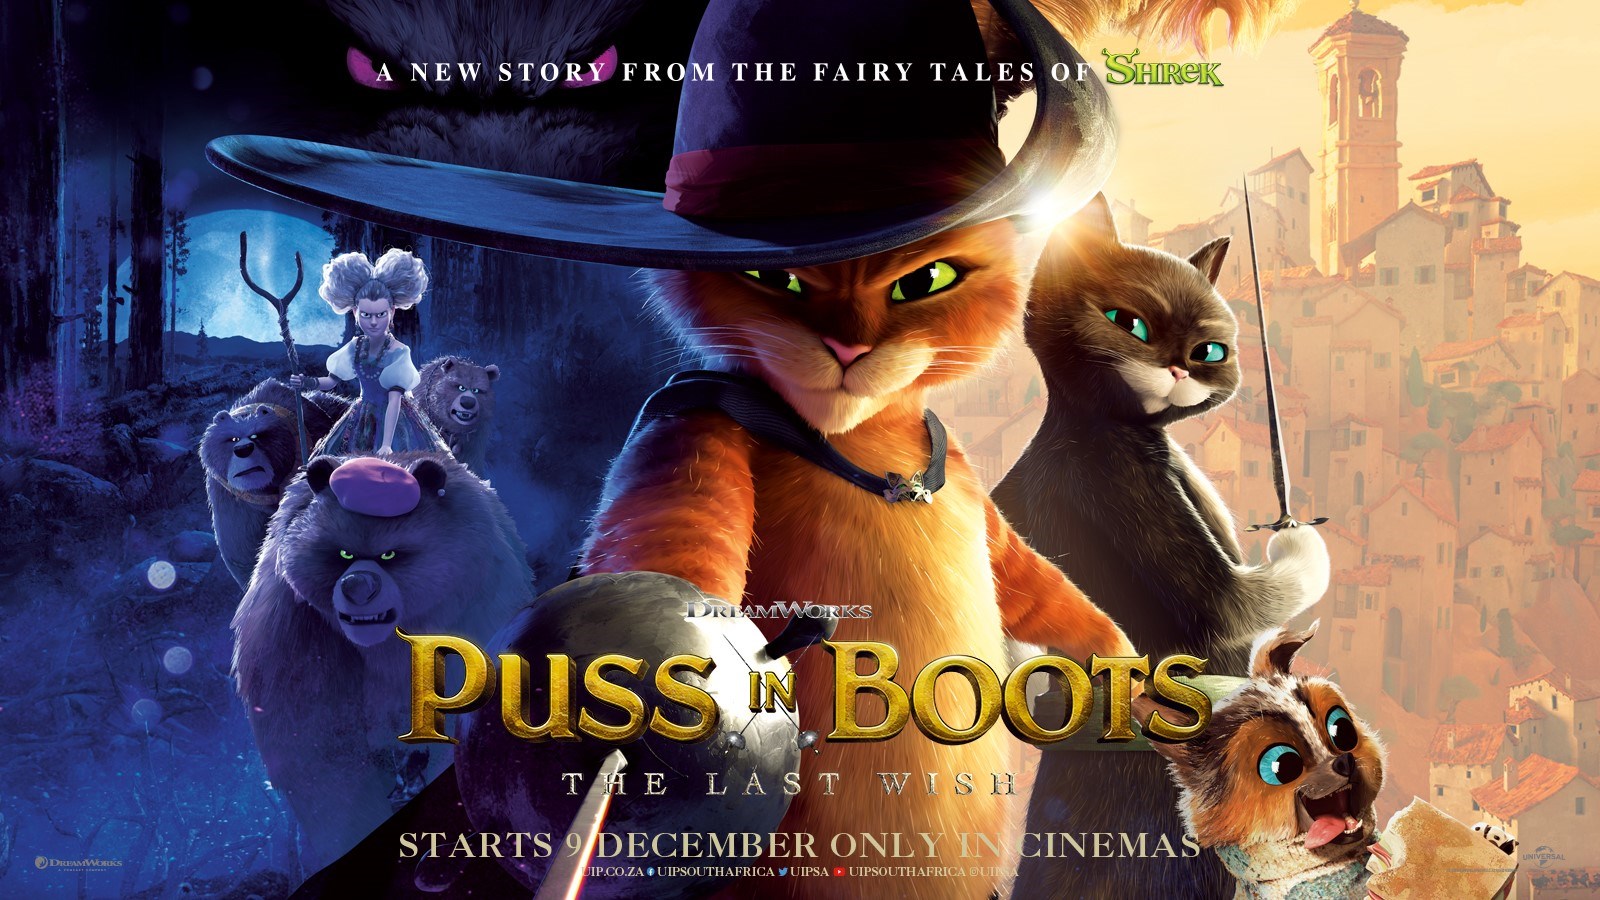 PUSS IN BOOTS: THE LAST WISH. PUSS IN THE BOOTS:THE LAST WISH